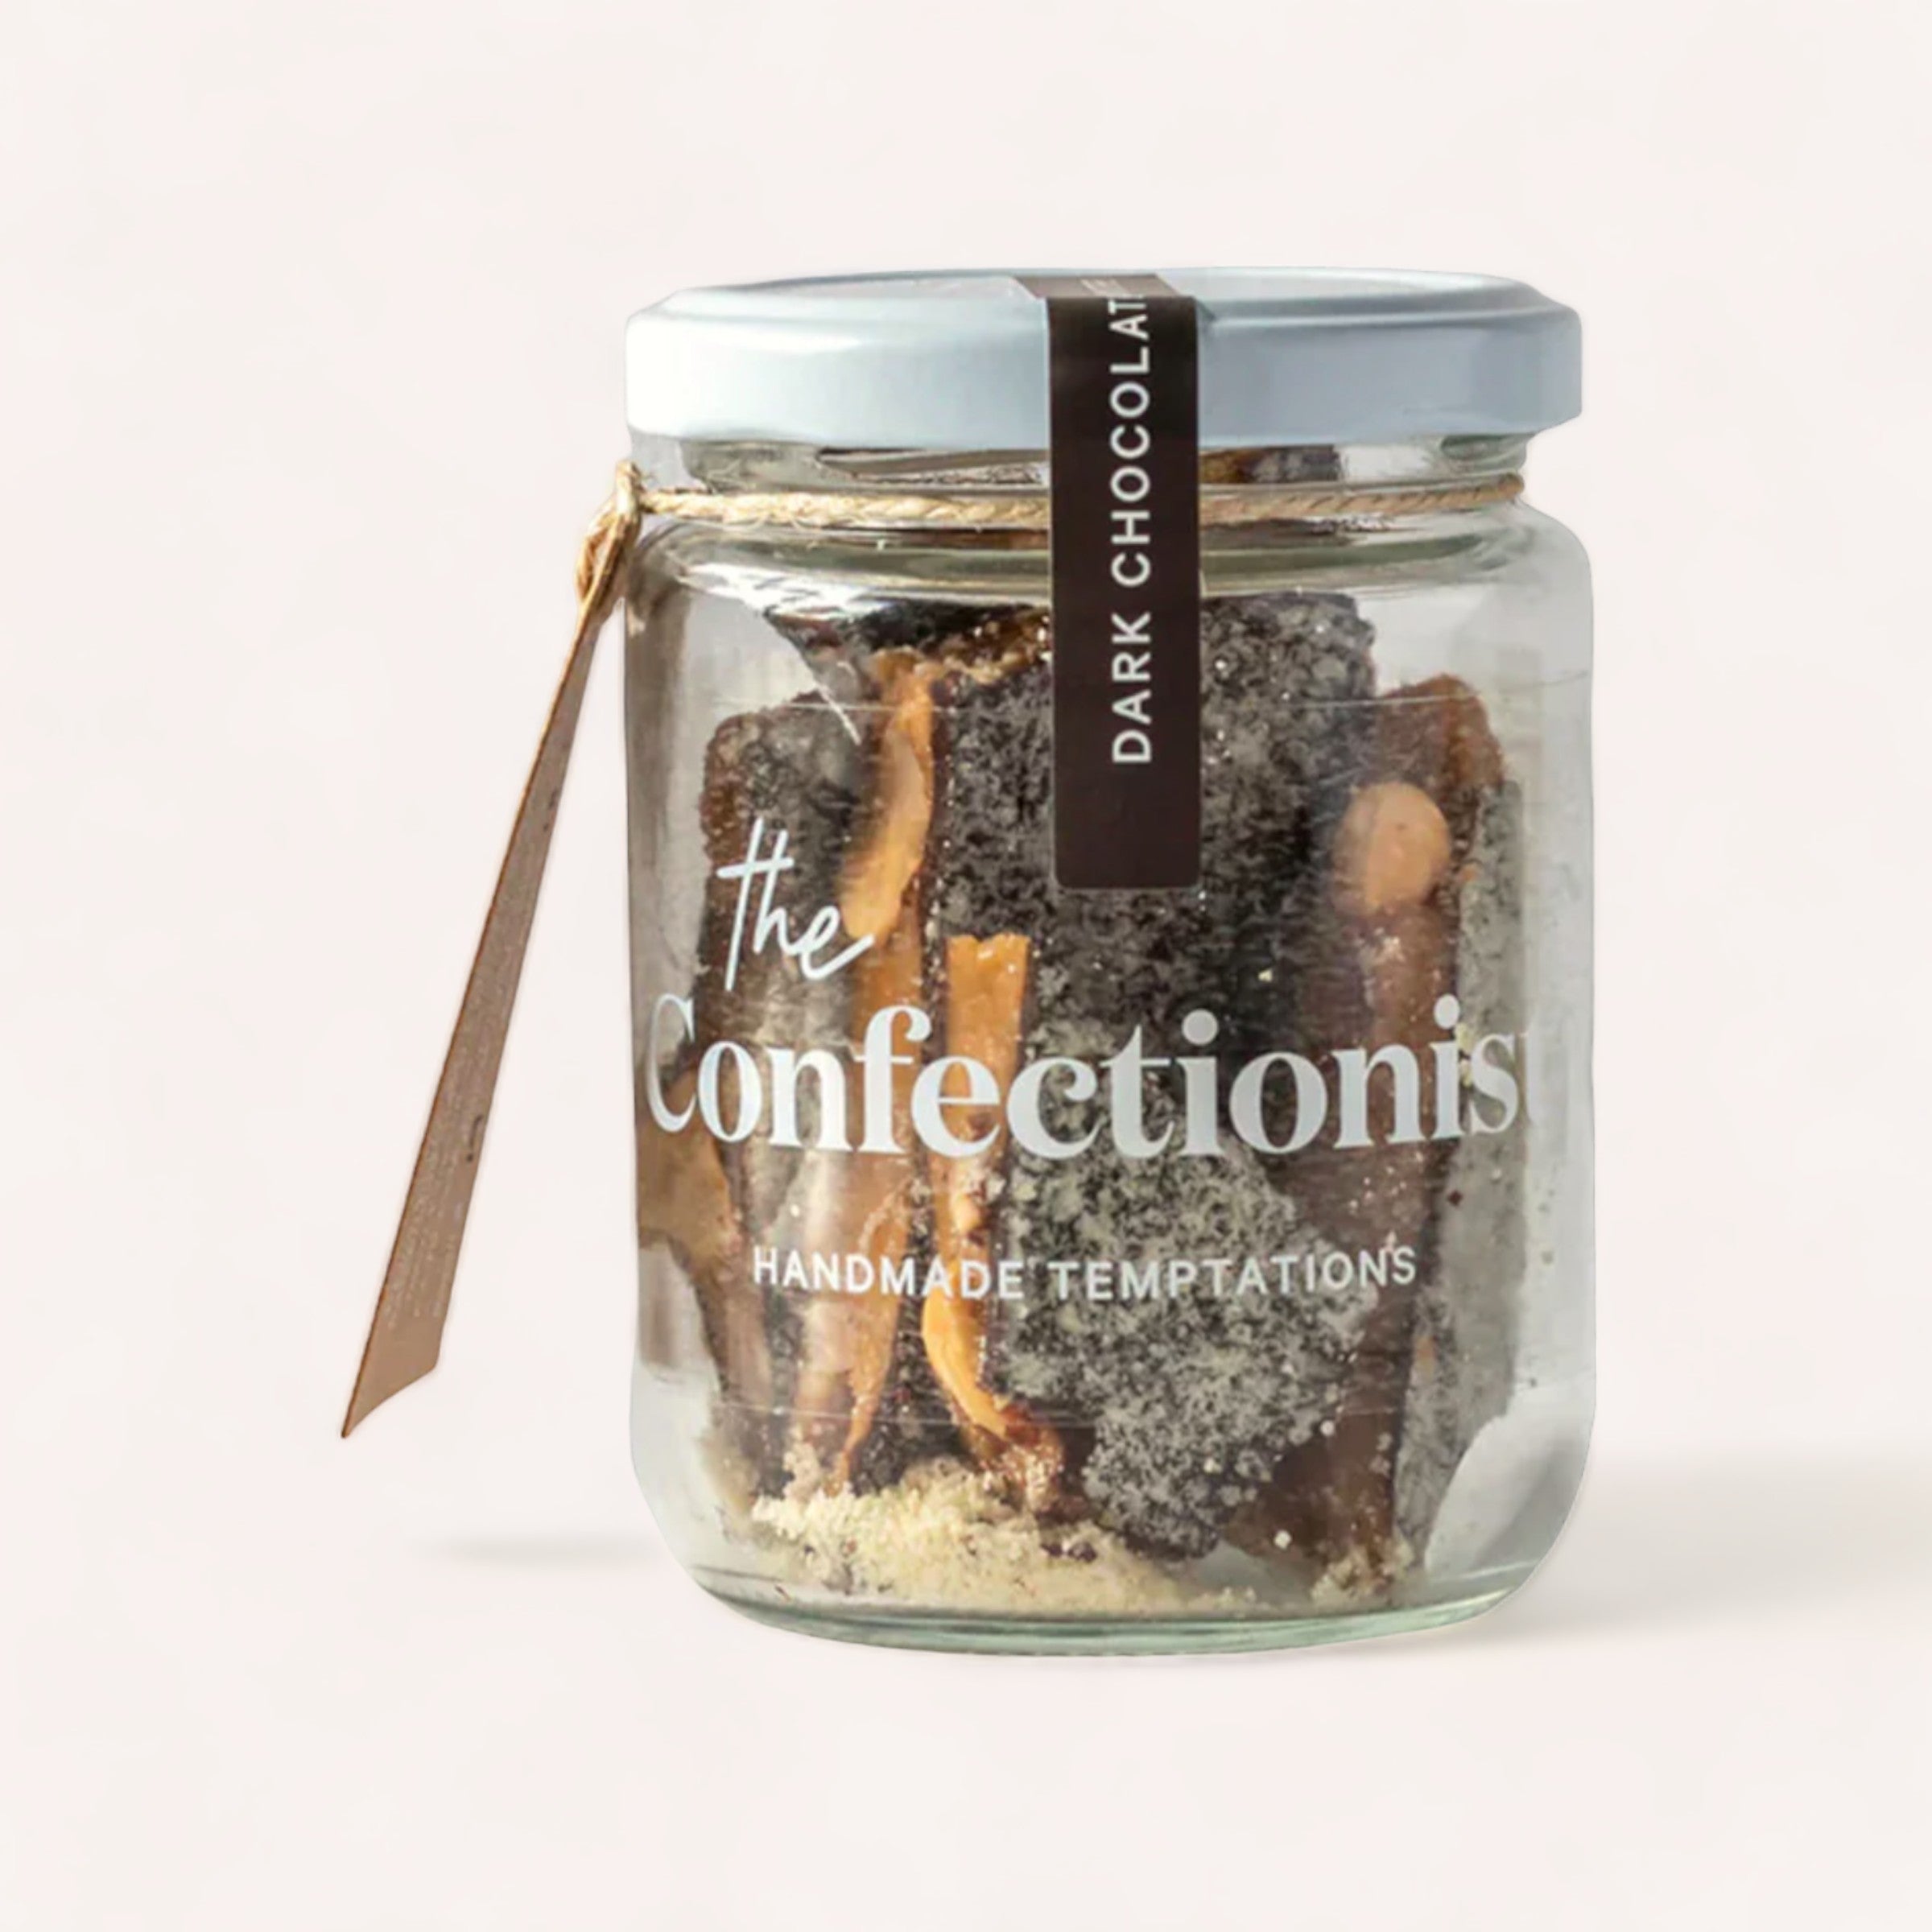 A clear glass jar containing Almond Dark Chocolate Toffee by The Confectionist, labeled "the confectionist - handmade temptations", sealed with a silver lid and decorated with a brown ribbon.